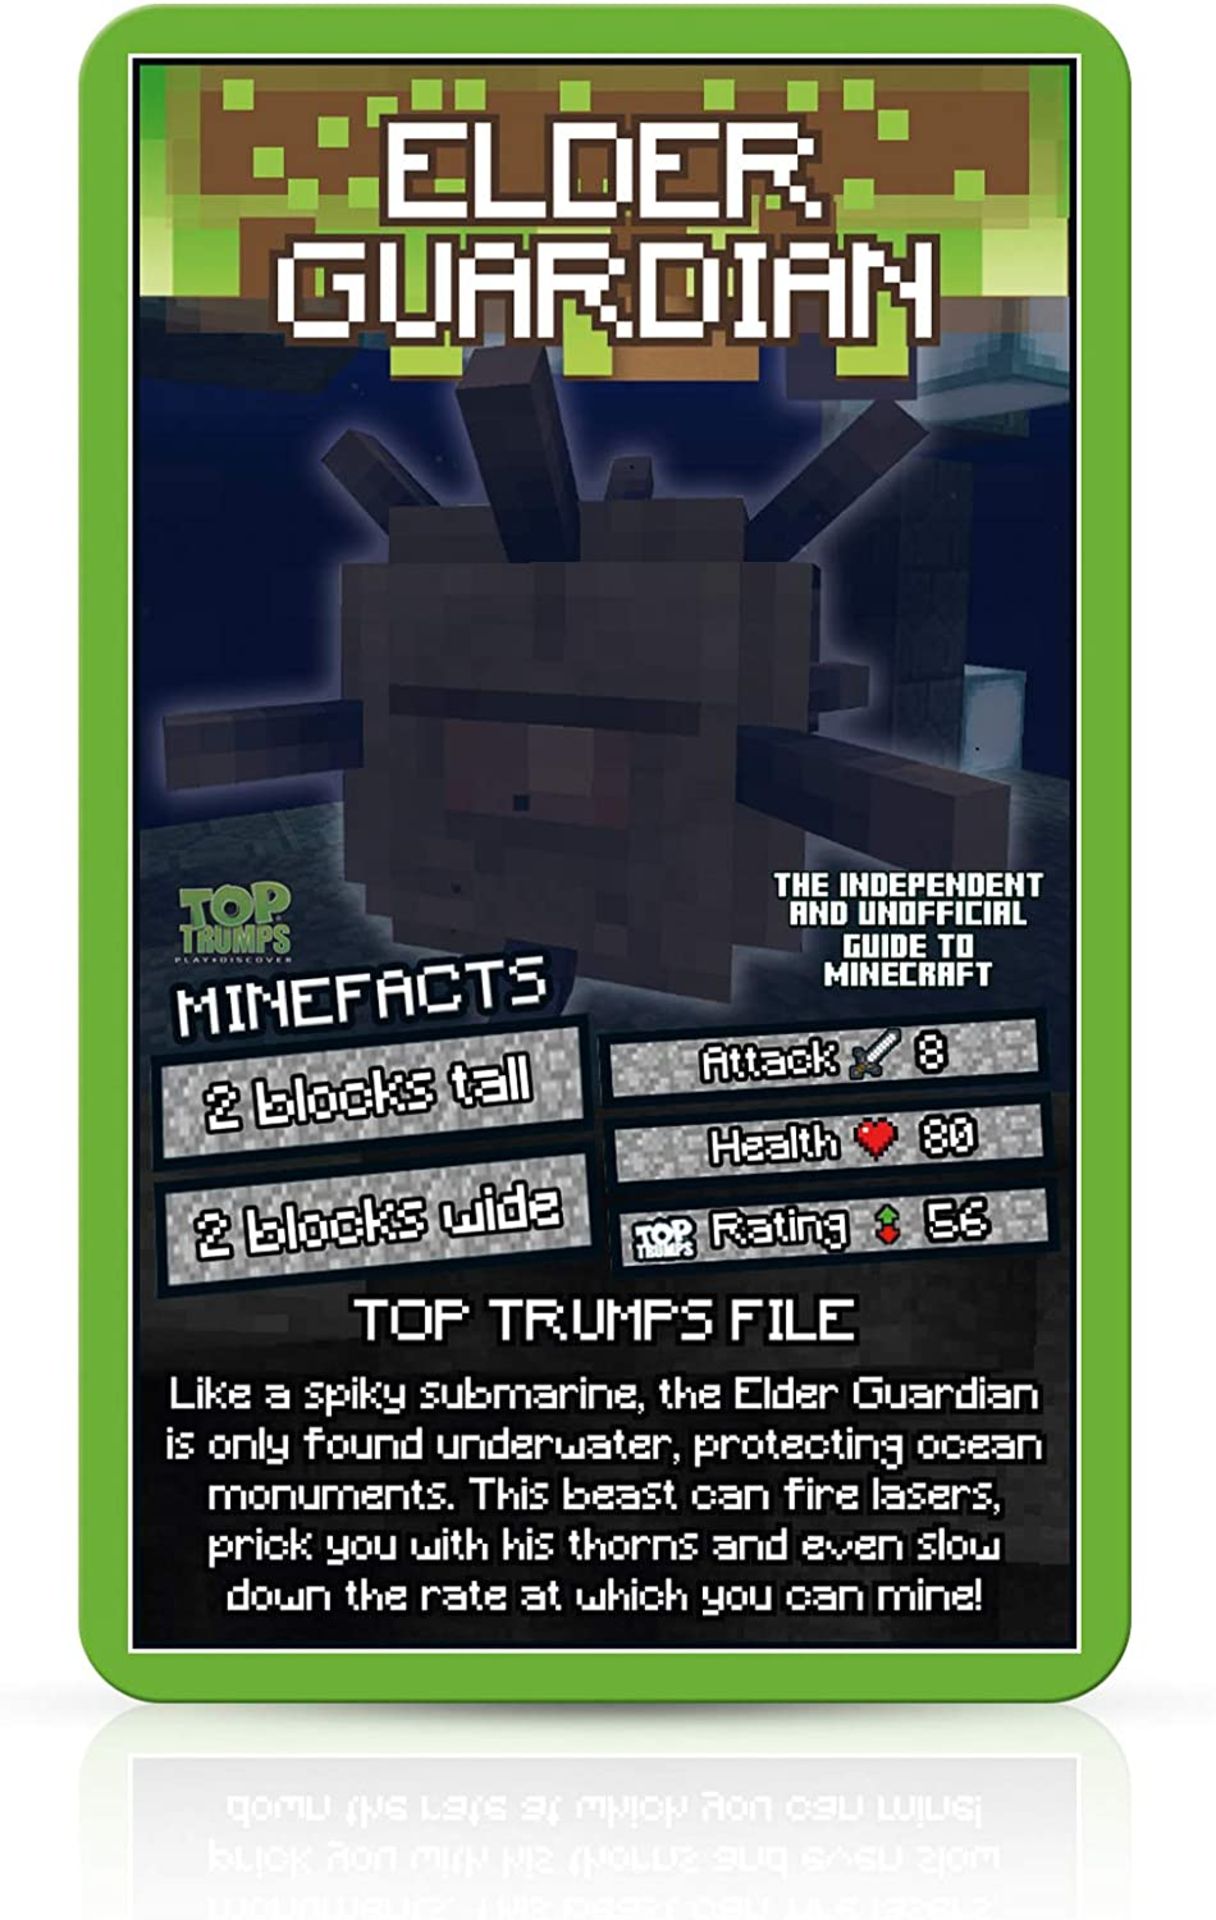 30 x Top Trumps 037310 The Unofficial and Independent Guide to Minecraft Card Game, Green |503690503 - Image 3 of 7